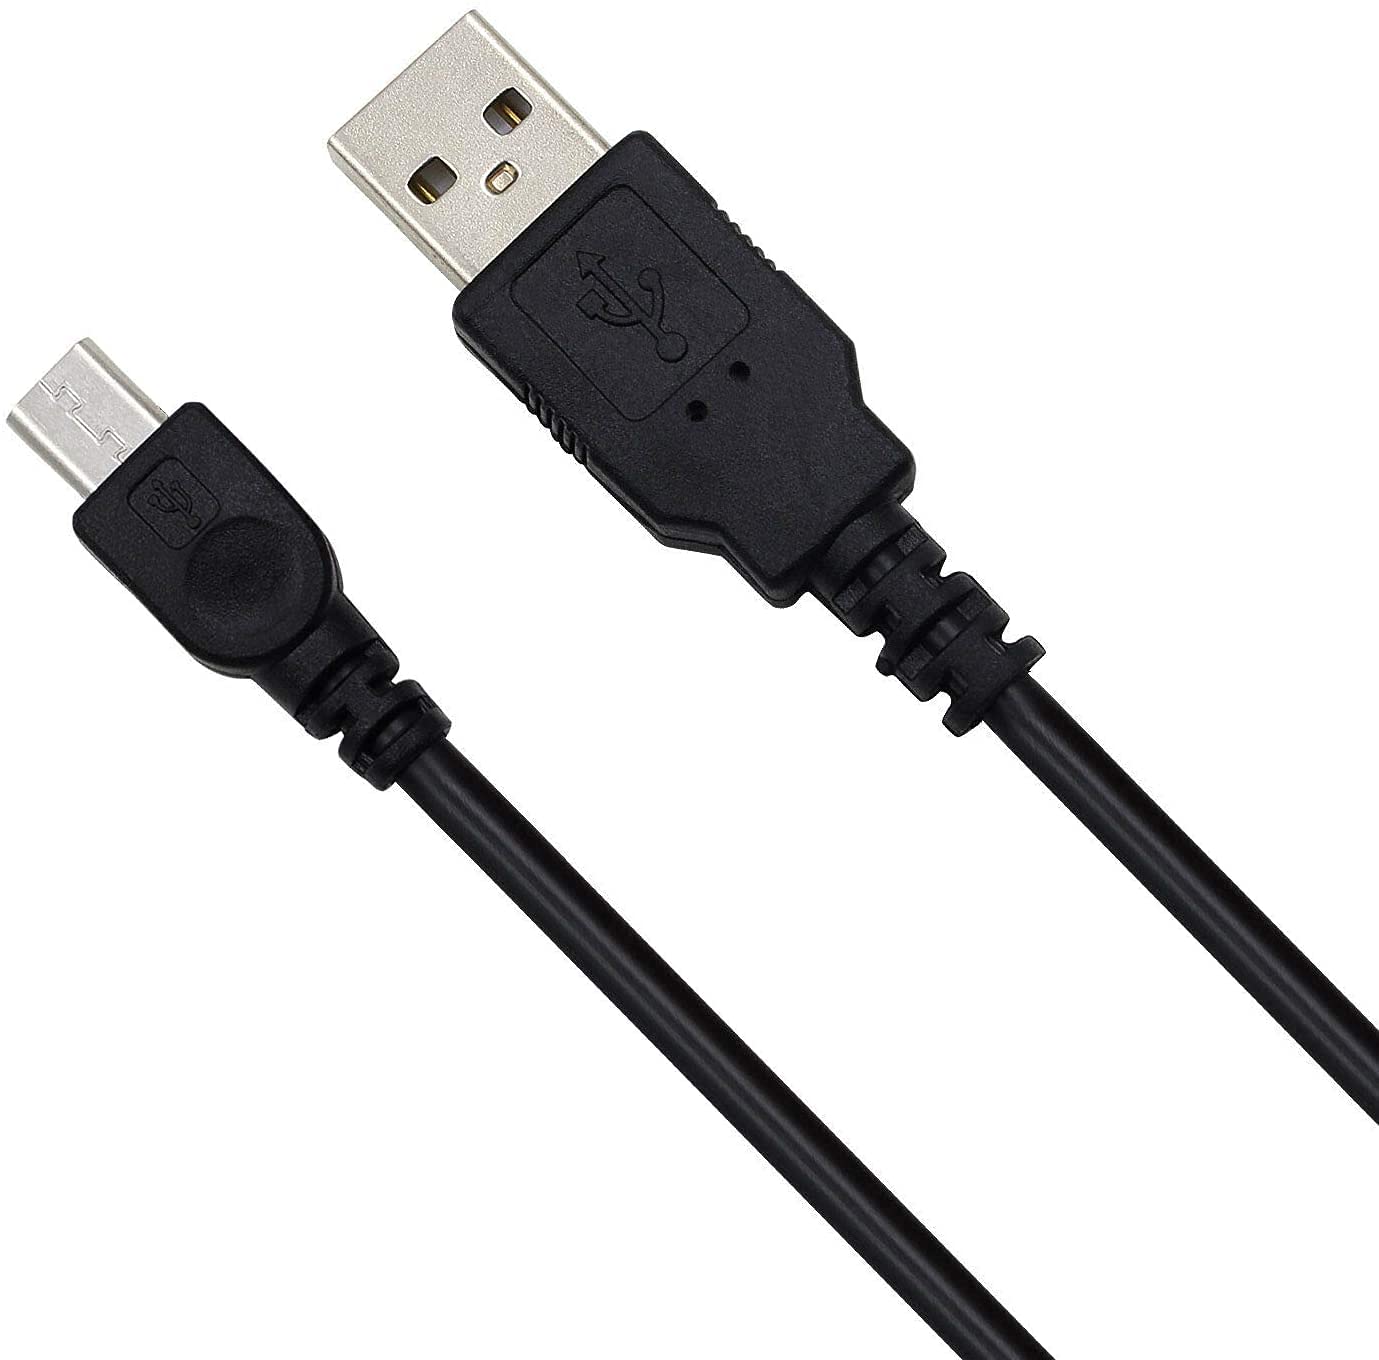 BestCH USB Power Cable Cord for Rand McNally TND-500 TND-510 RVND-5510 5 TND-710 RVND-7710 7 RandMcNally IntelliRoute Truck GPS Receiver